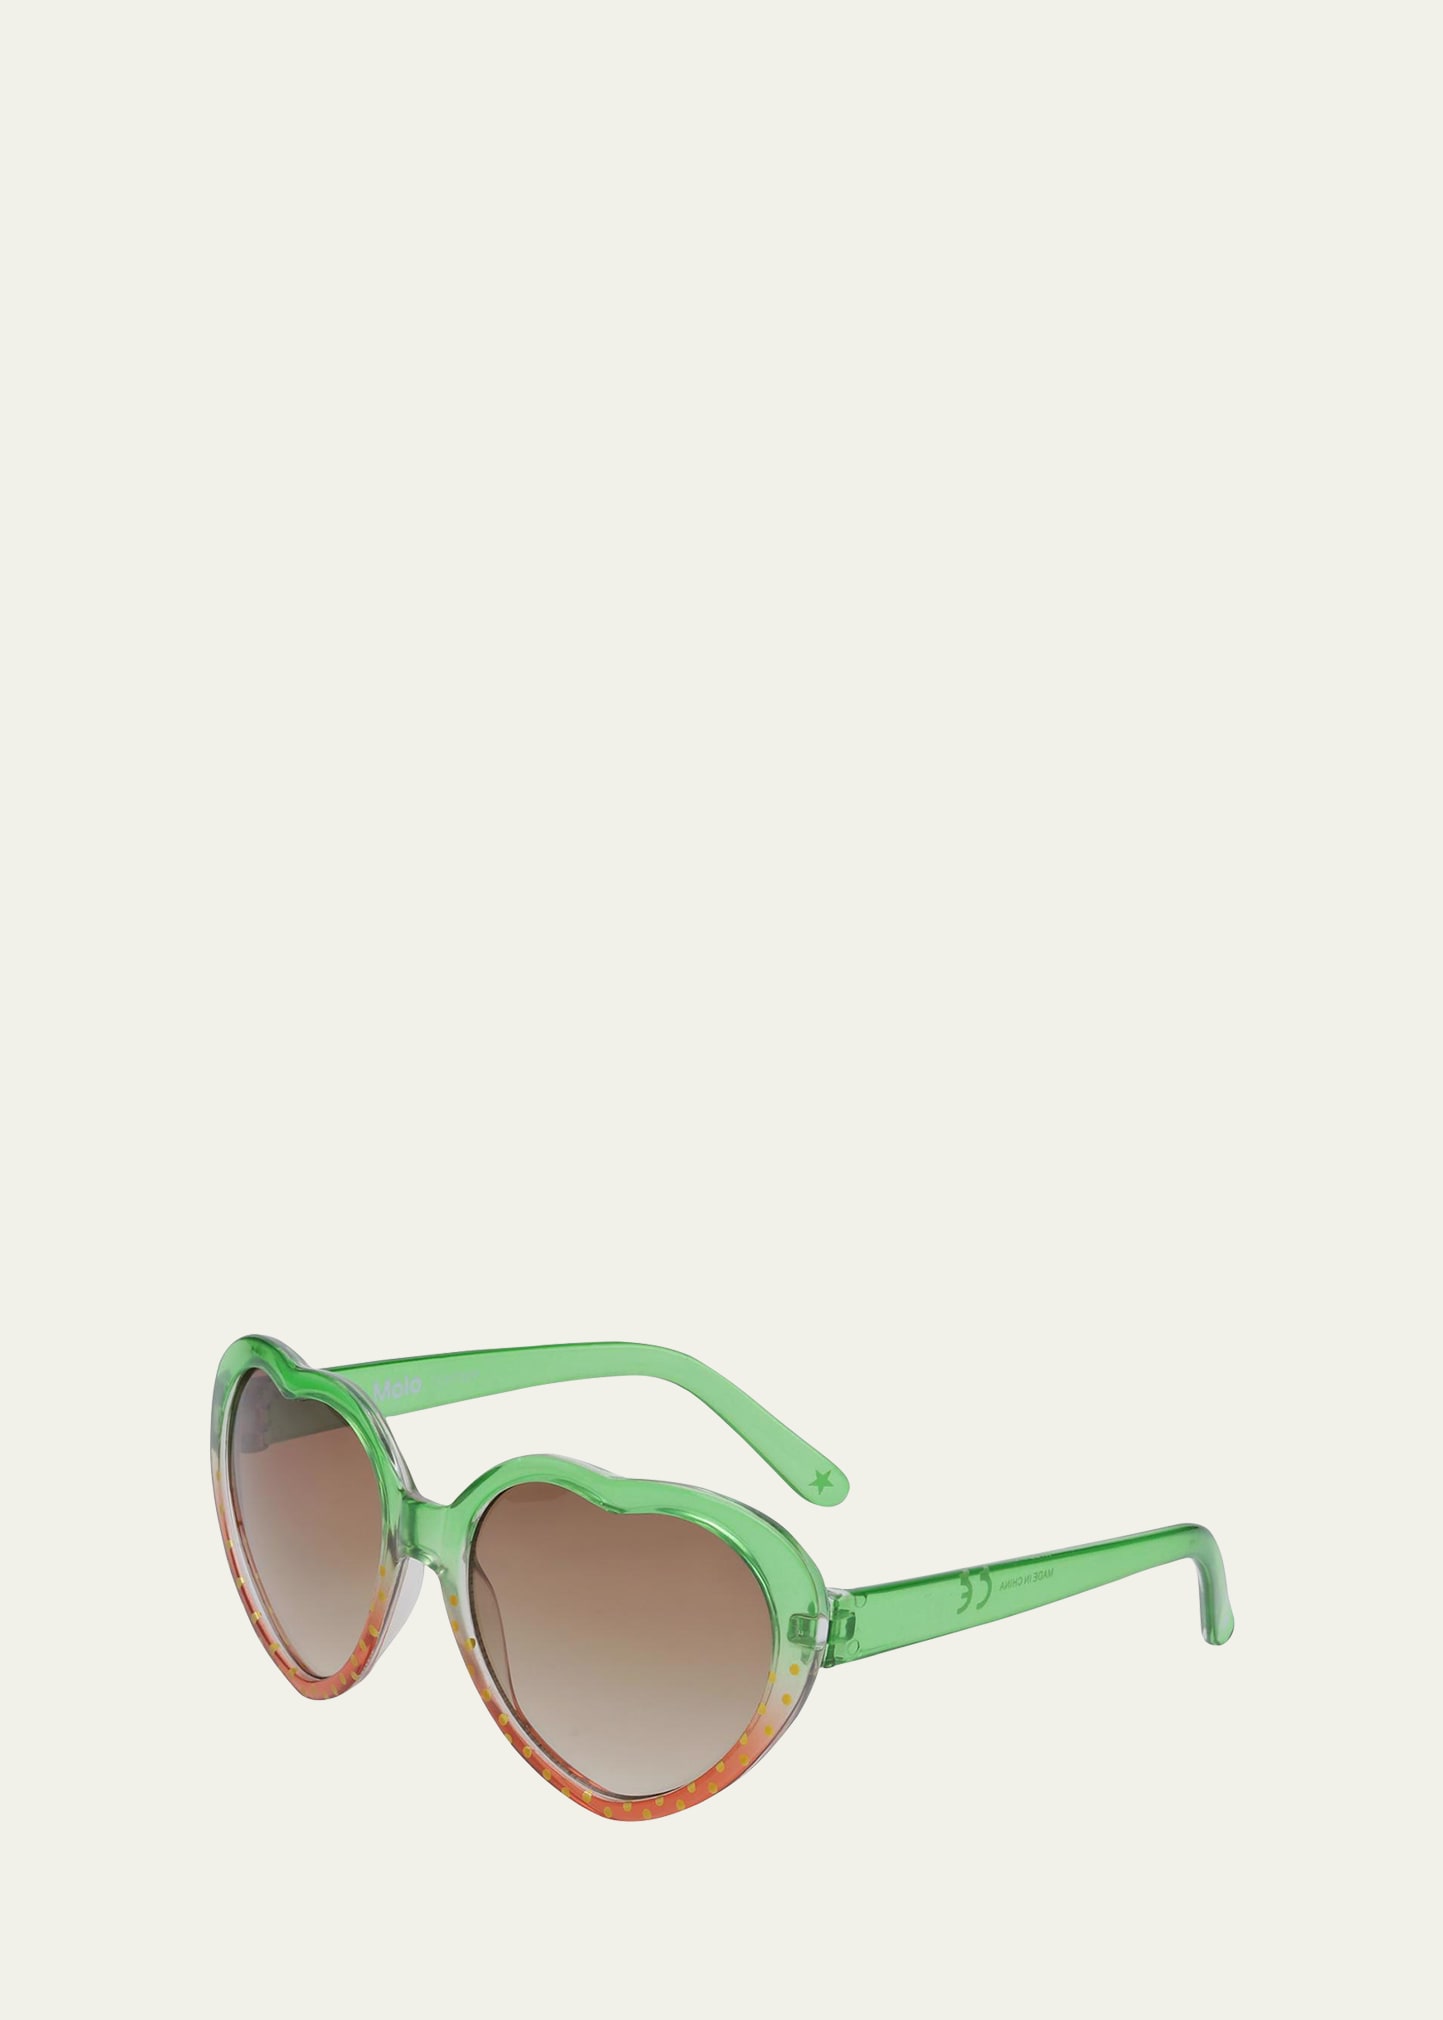 Girl's Heart-Shaped Sunglasses With Strawberry Effect